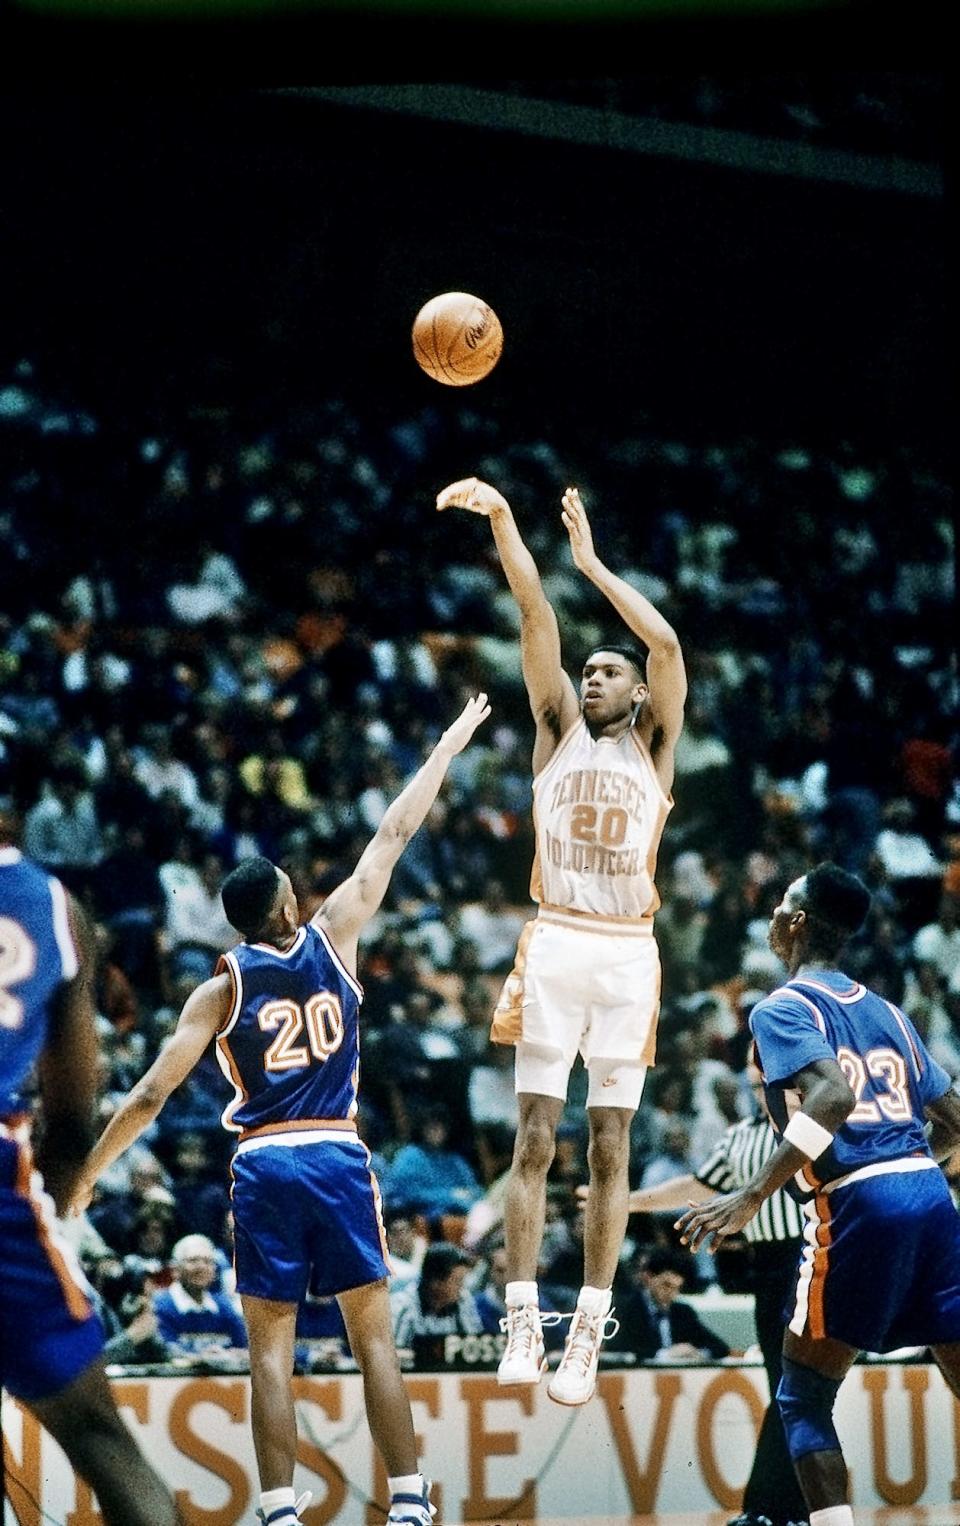 Allan Houston tops the list at 2,801 career points, second in the SEC behind Pete Maravich.